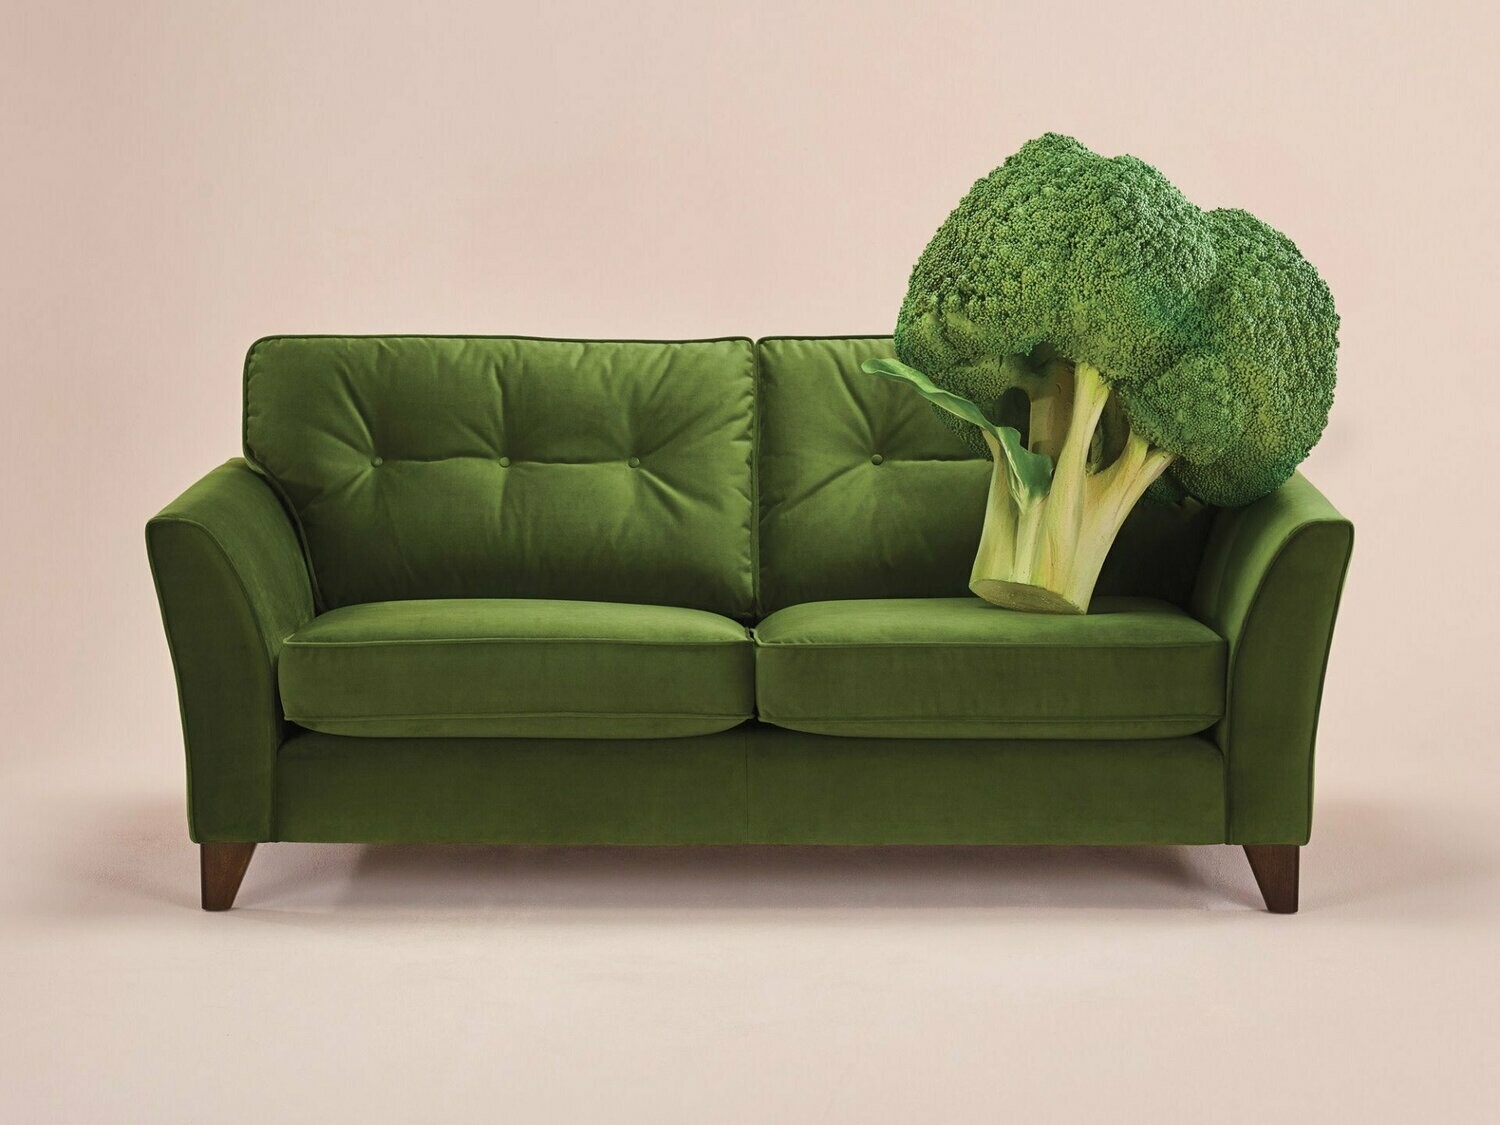 The Lounge Co. Melody Sofa | David Phipp Furniture Store